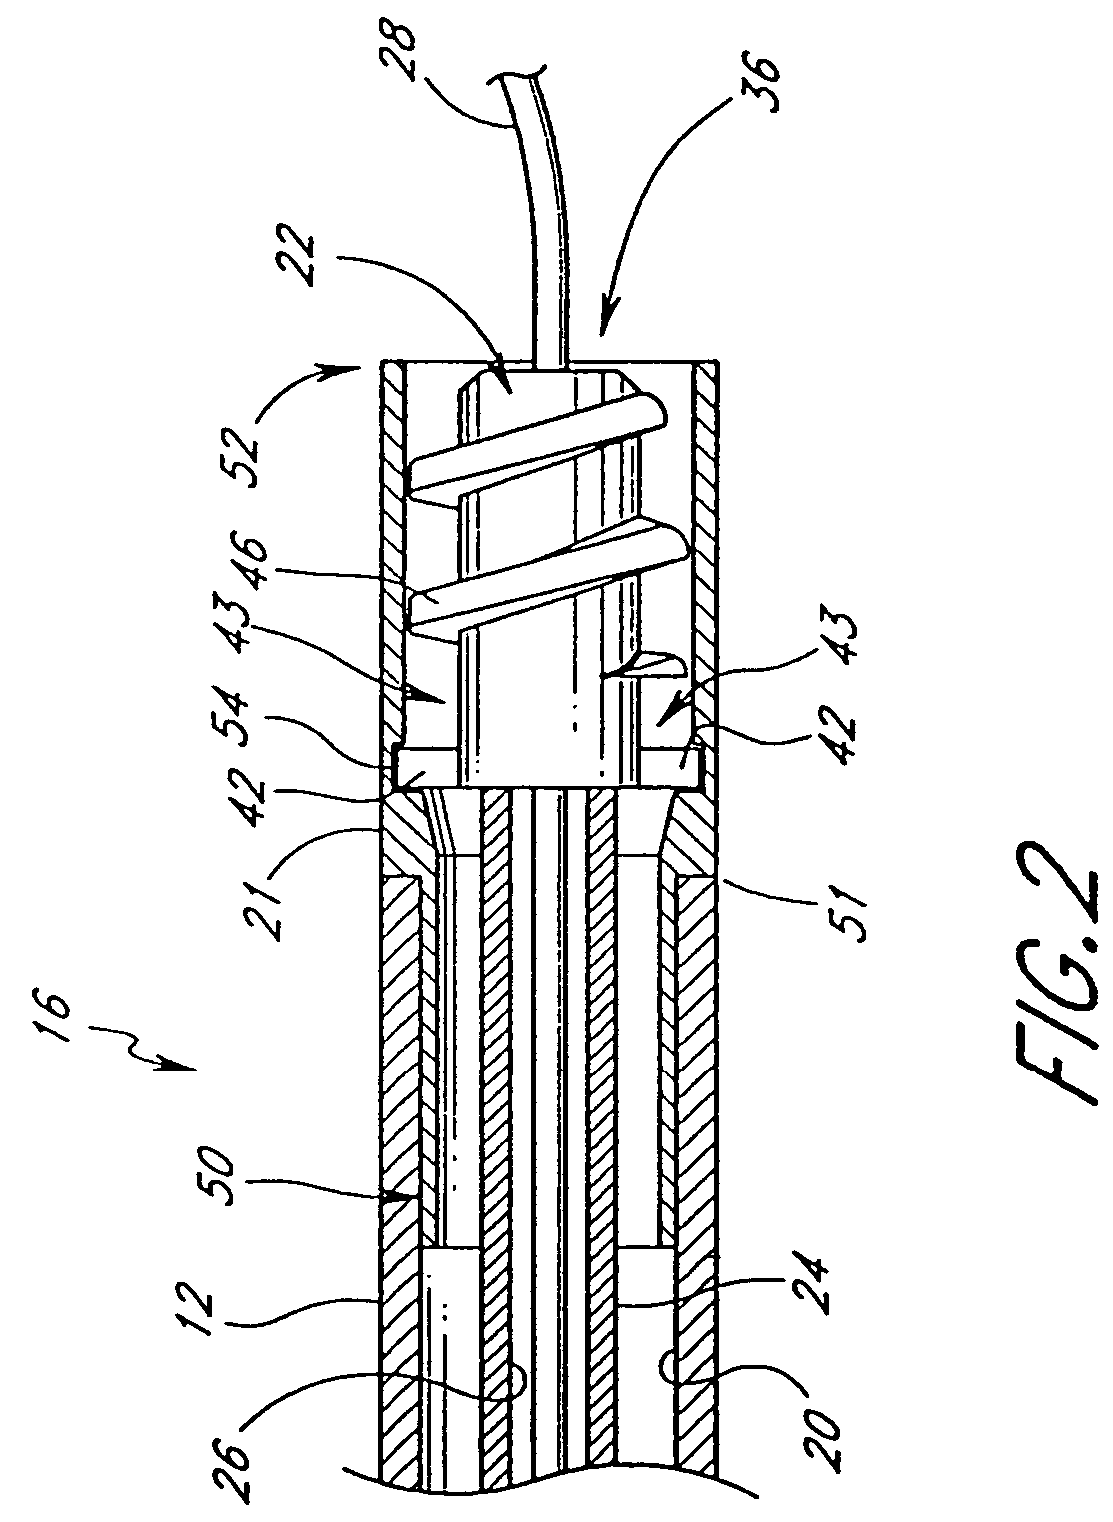 Rotational atherectomy system with stationary cutting elements